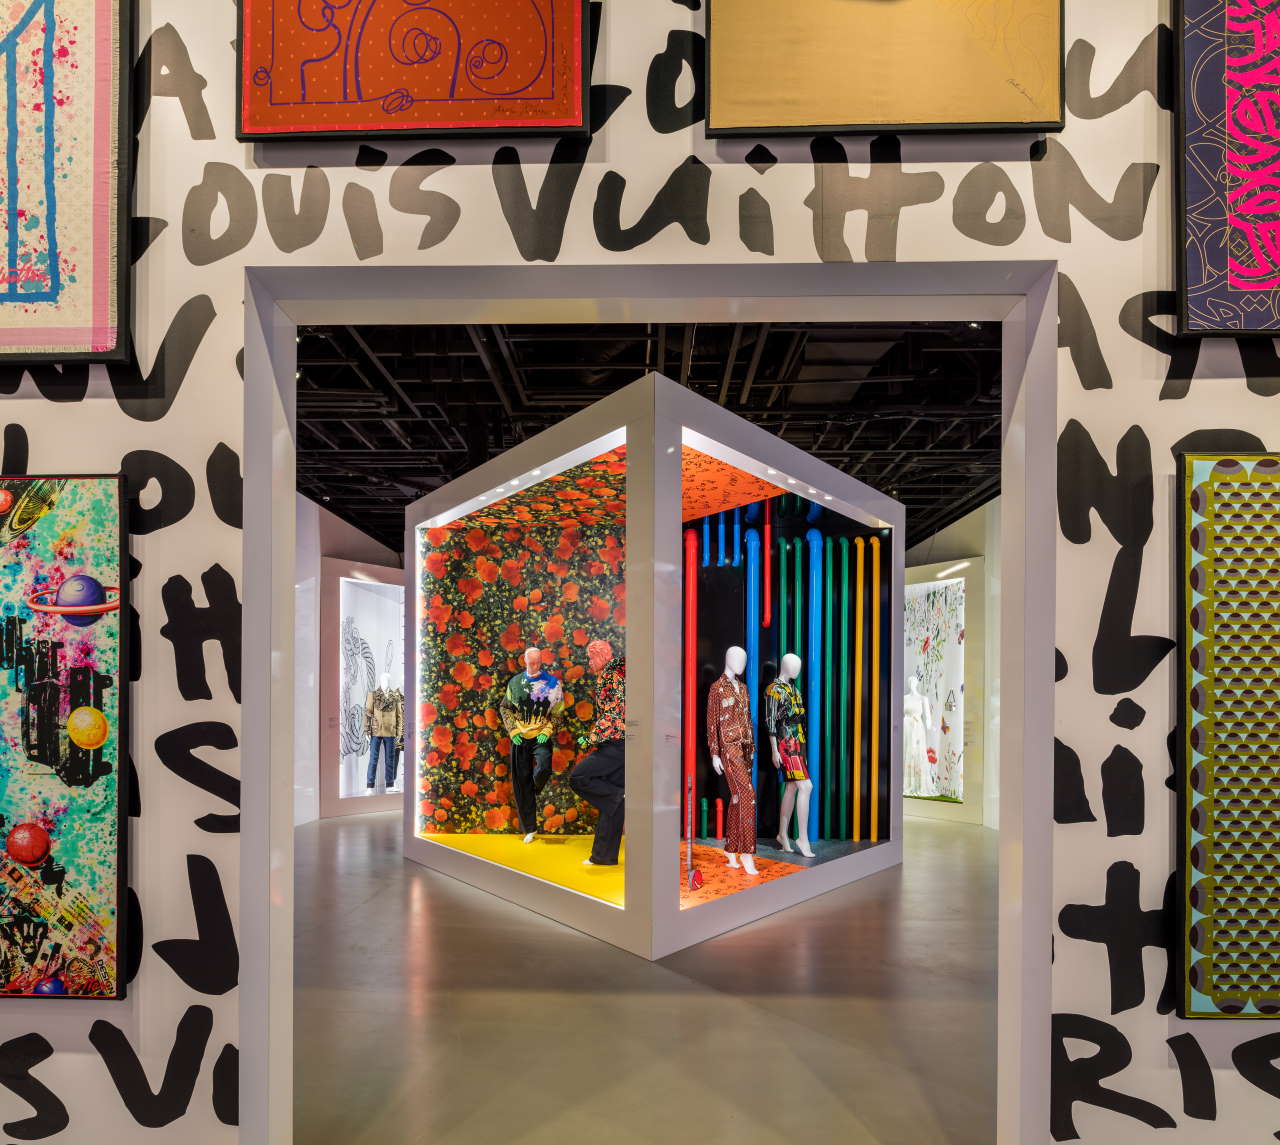 Explore 160 years of Louis Vuitton heritage at this pop-up exhibition